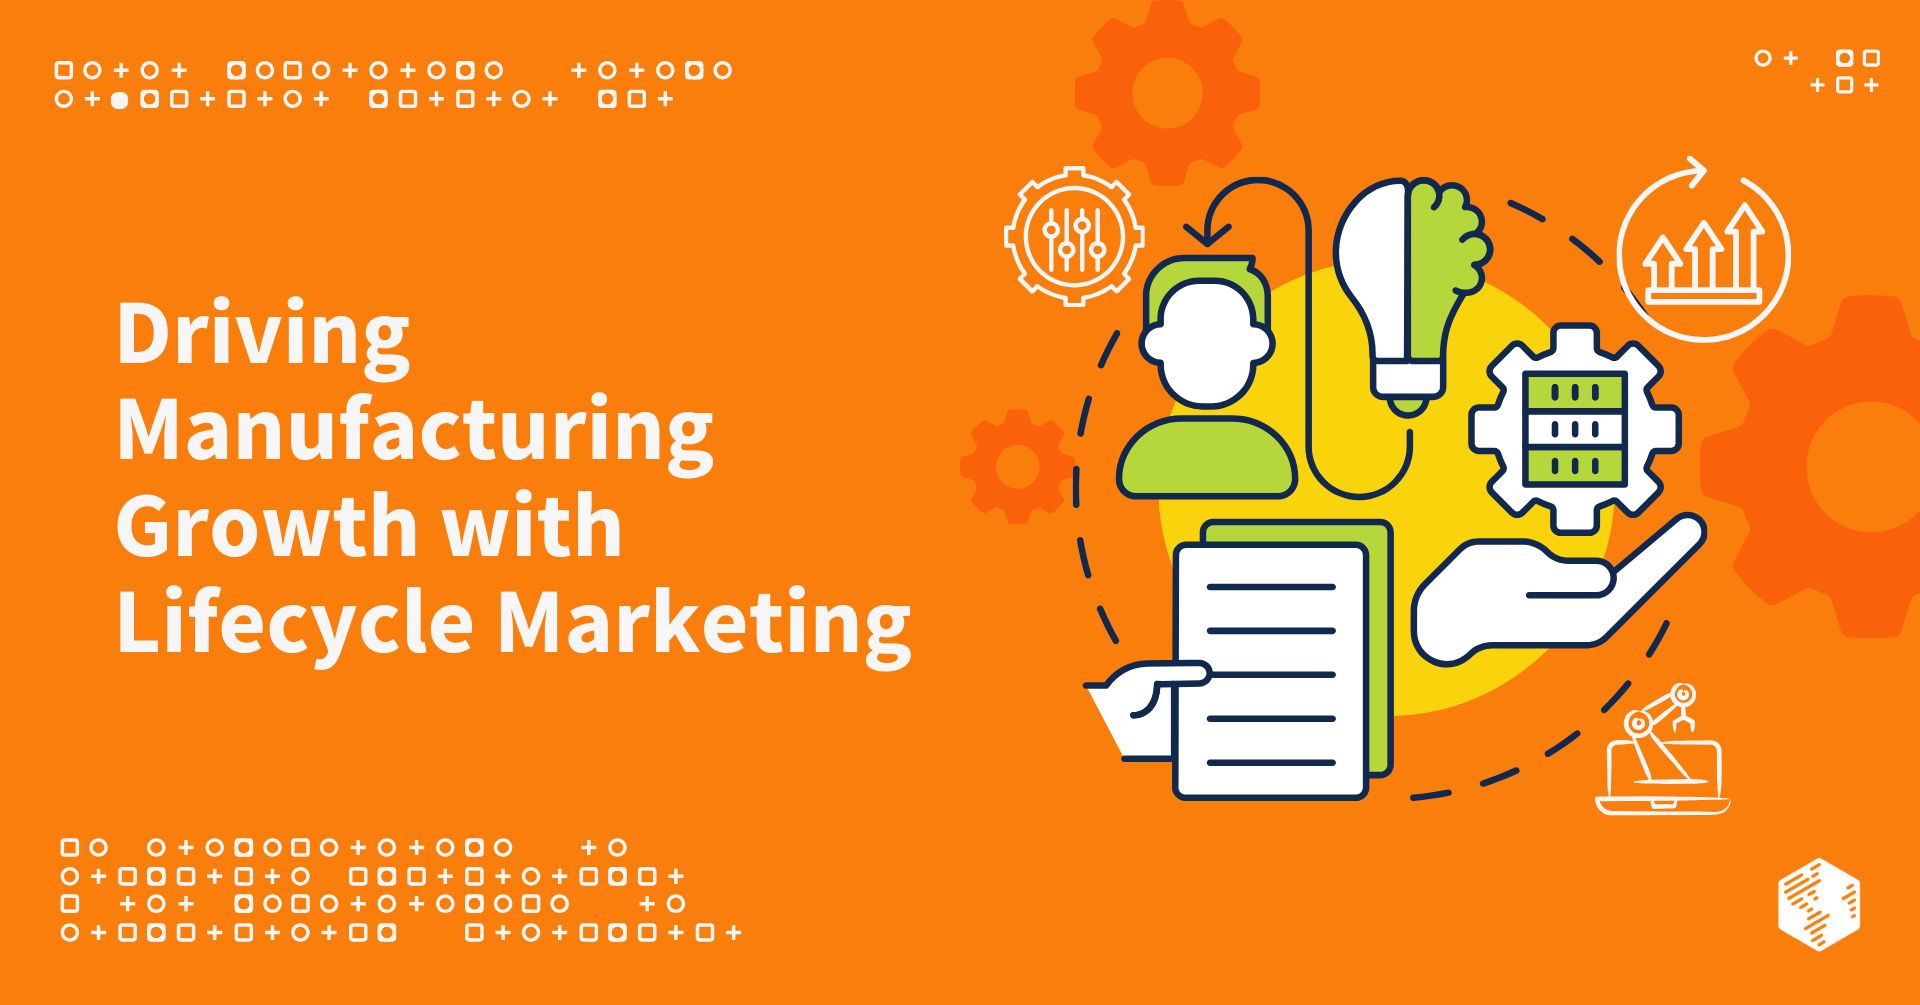 Driving Manufacturing Growth with Lifecycle Marketing